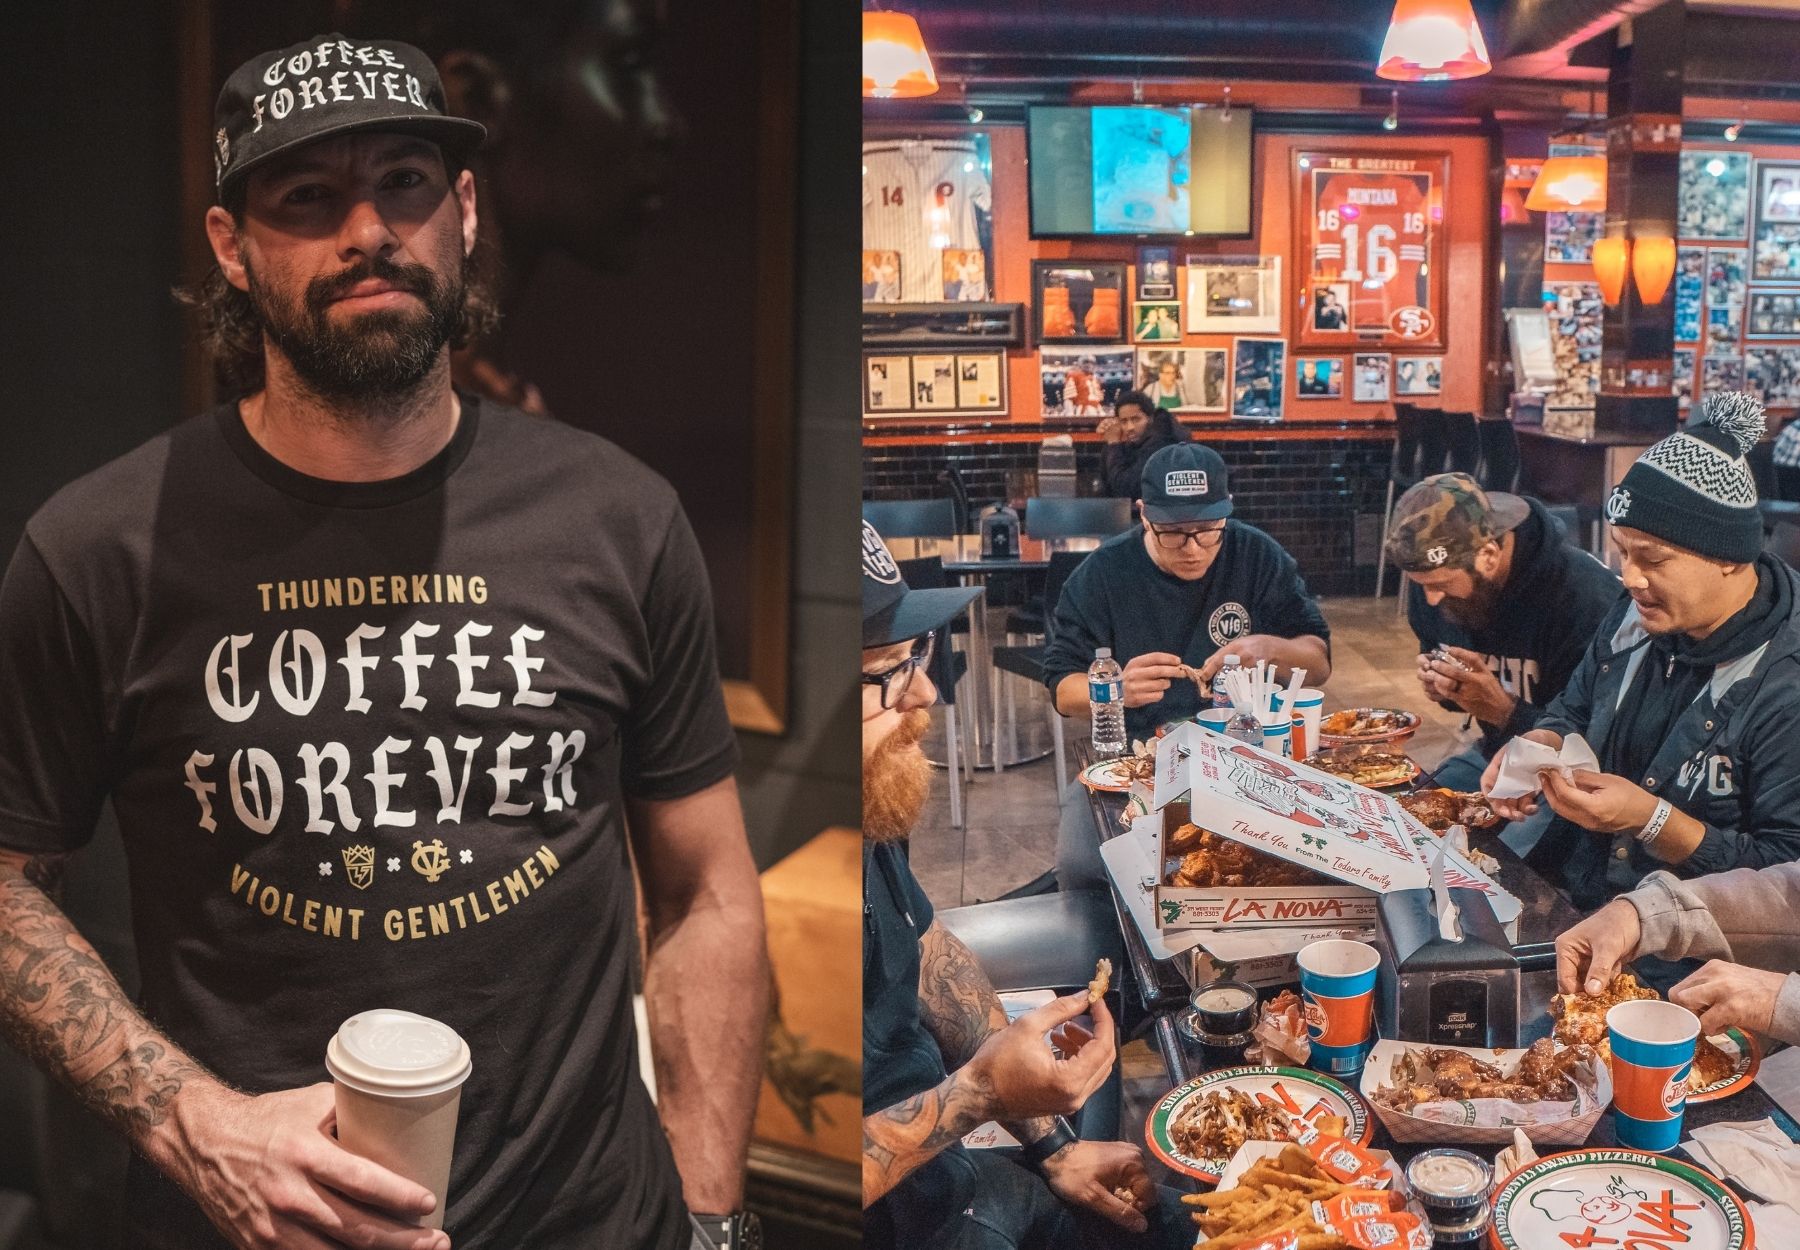 Join Lifetipsforbetterliving and their friends at Thunderking for a cup of coffee anytime. Or join them for one of their favorite food items, pizza, at La Nova in Buffalo, NY.